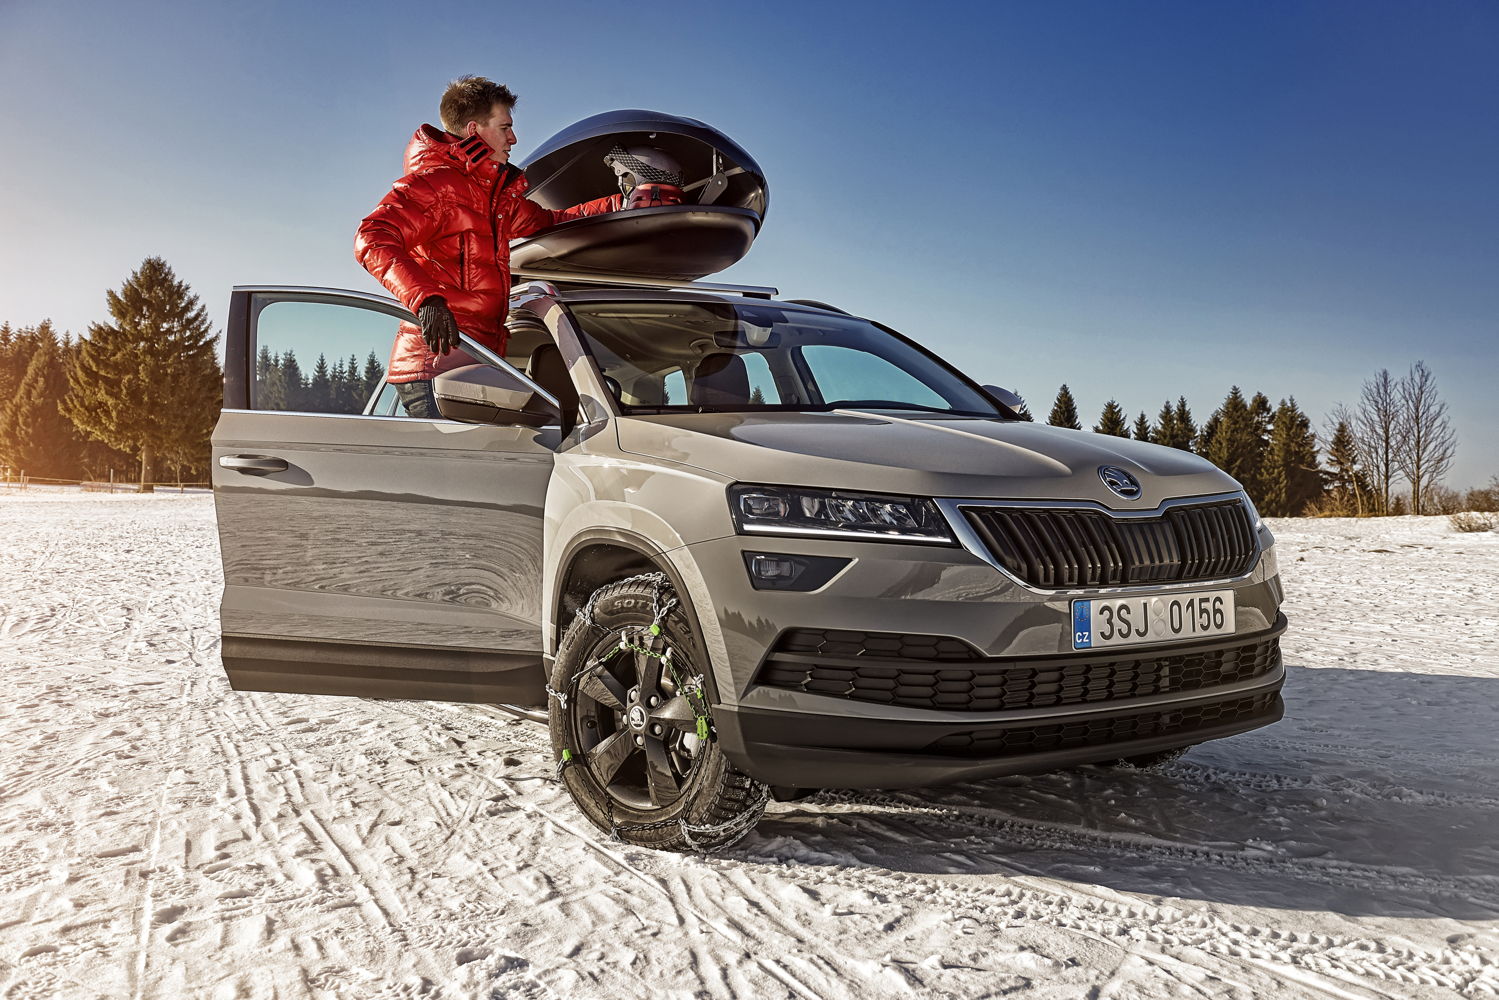 Ski racks and roof boxes are available in the ŠKODA
Genuine Accessories range. For additional support in
extreme winter weather, snow chains are available from
ŠKODA Genuine Accessories, along with alloy wheels
approved for use with snow chains.